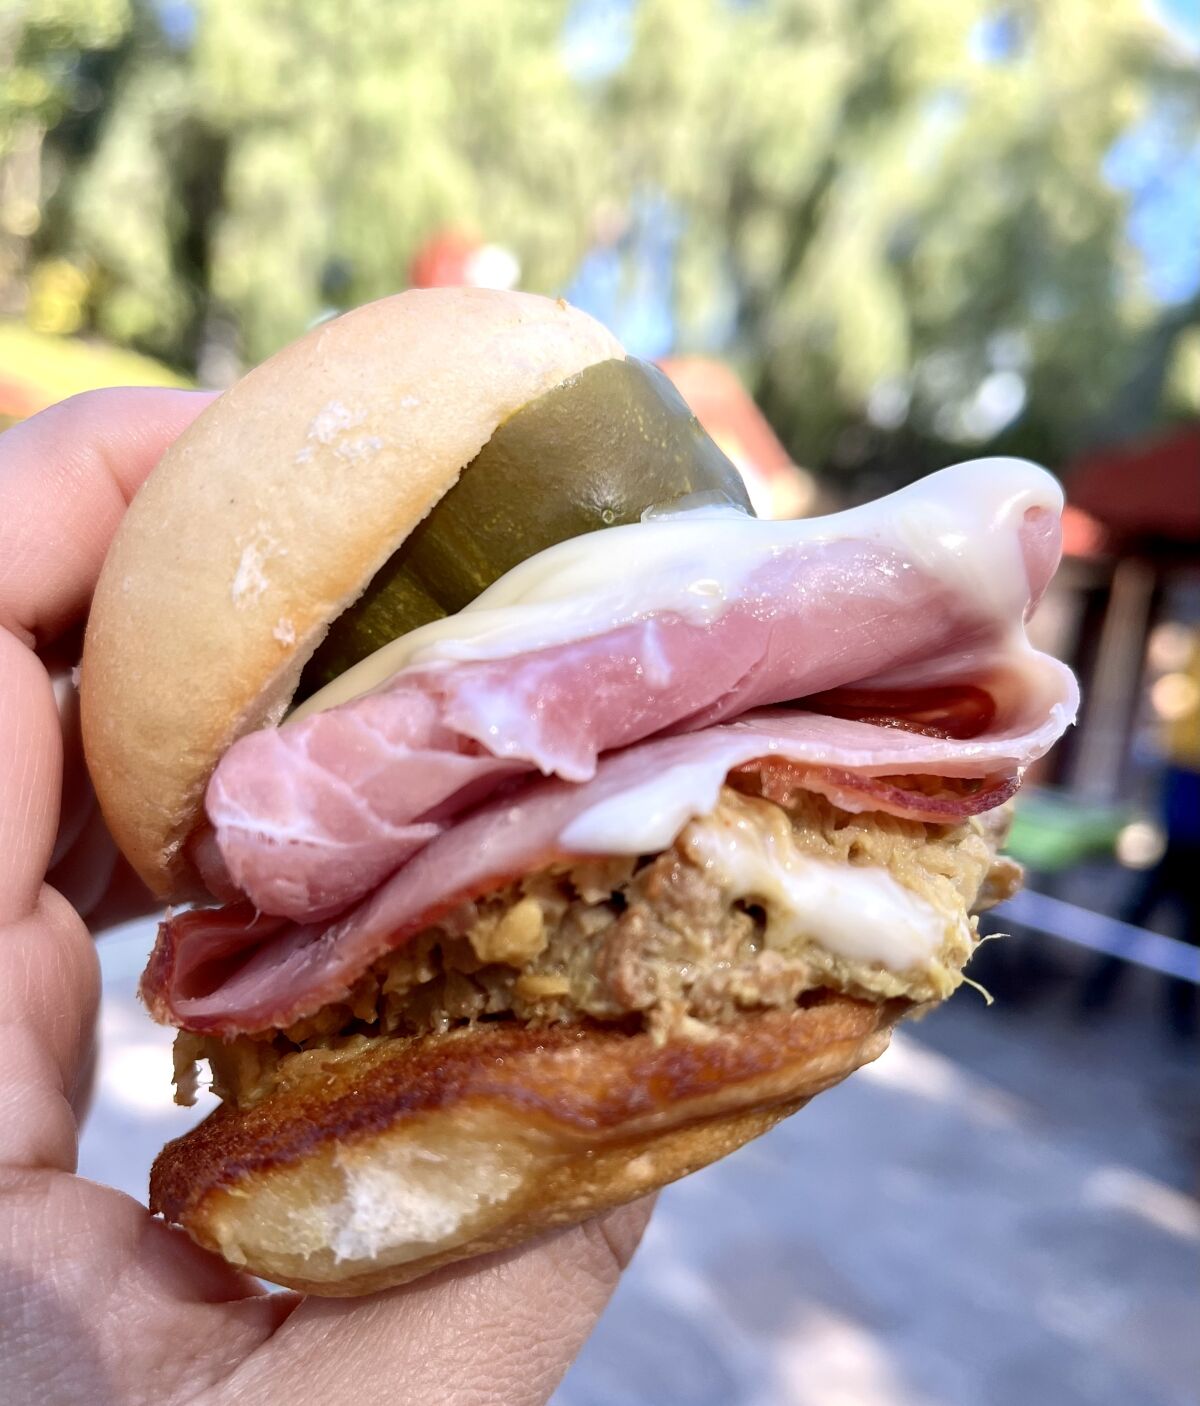 A Cubano slider with slow-roasted, mustard-crusted pork and sliced smoked ham from D*Lish.